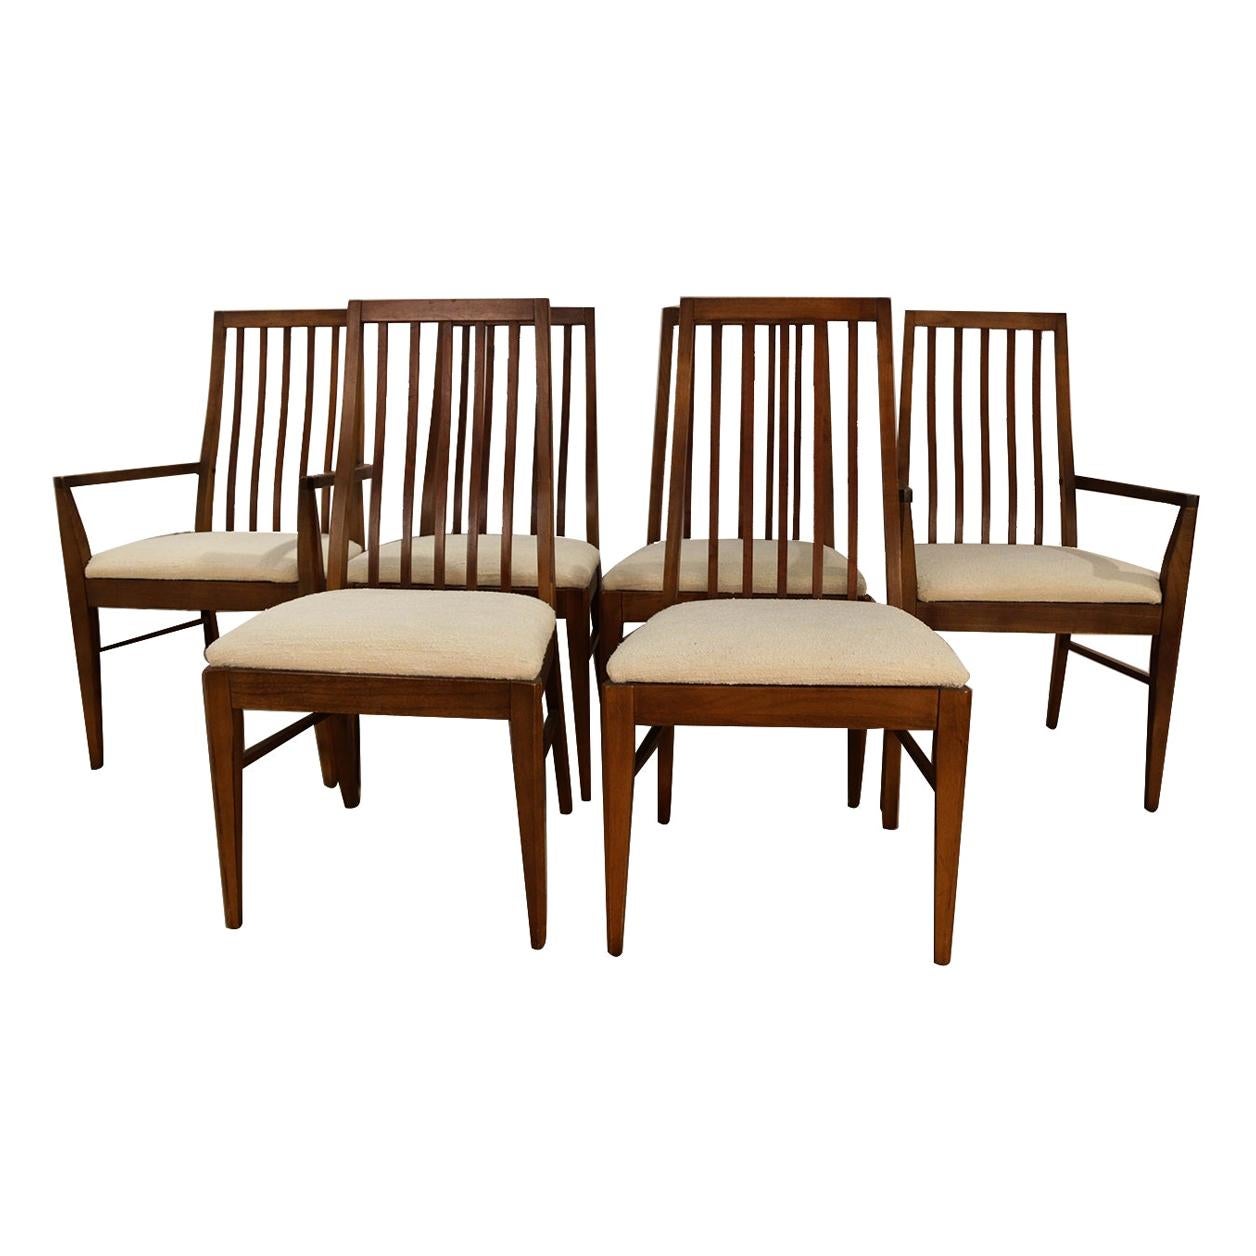 Six Lane First Edition Midcentury Walnut Spindle Back Dining Chairs